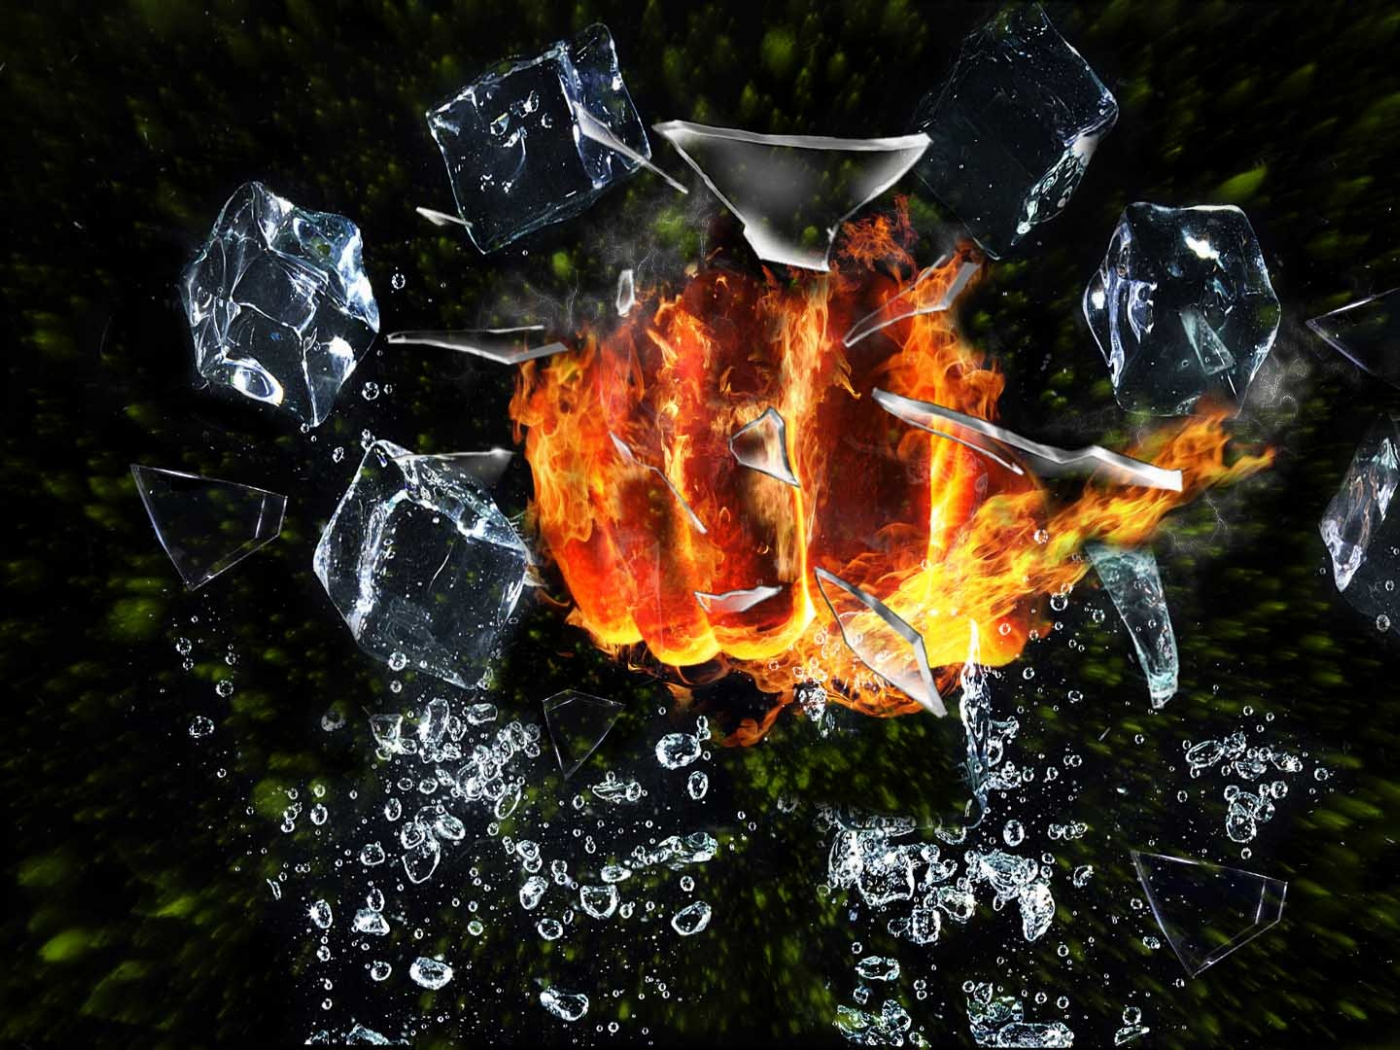 Desktop Wallpaper Fist Fire Ice Cubes Abstract Hd Image Picture Background F9dd5e